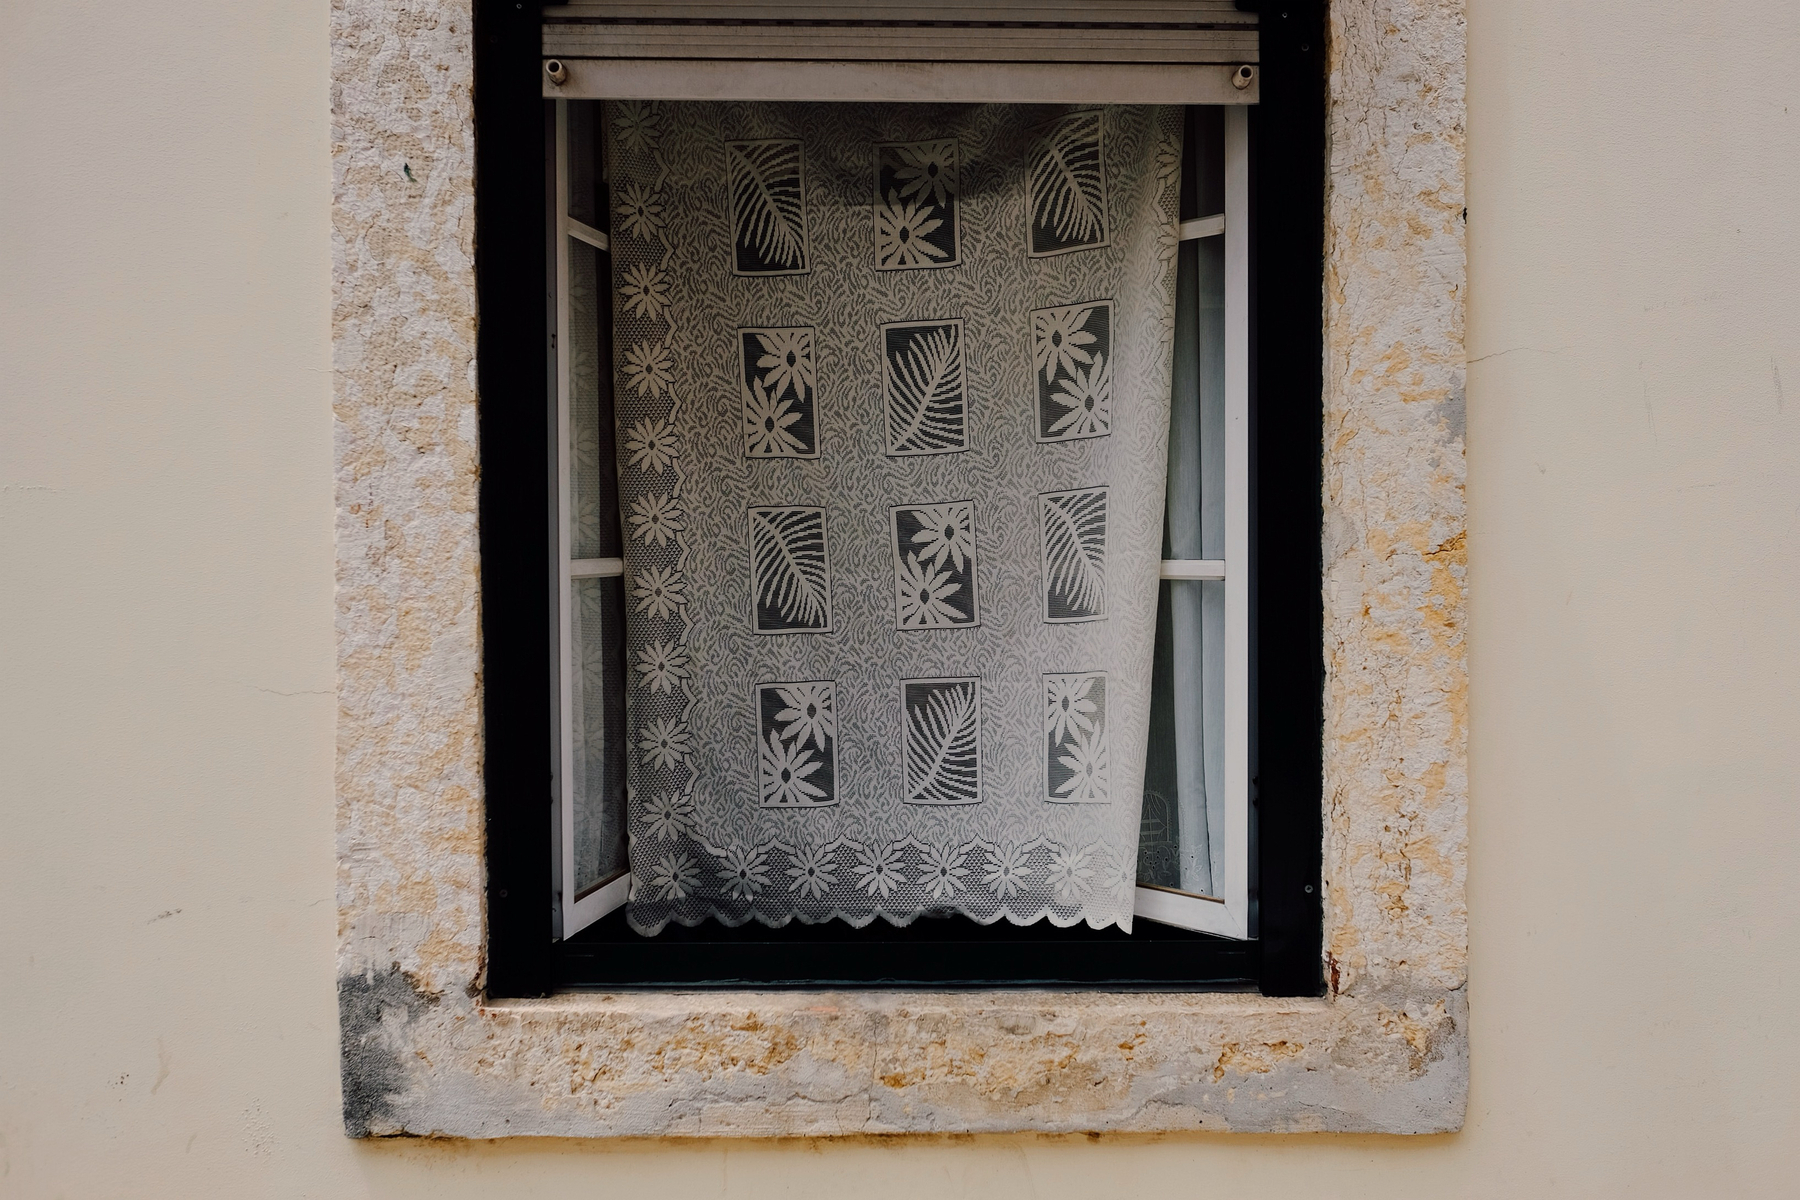 A window with a curtain.